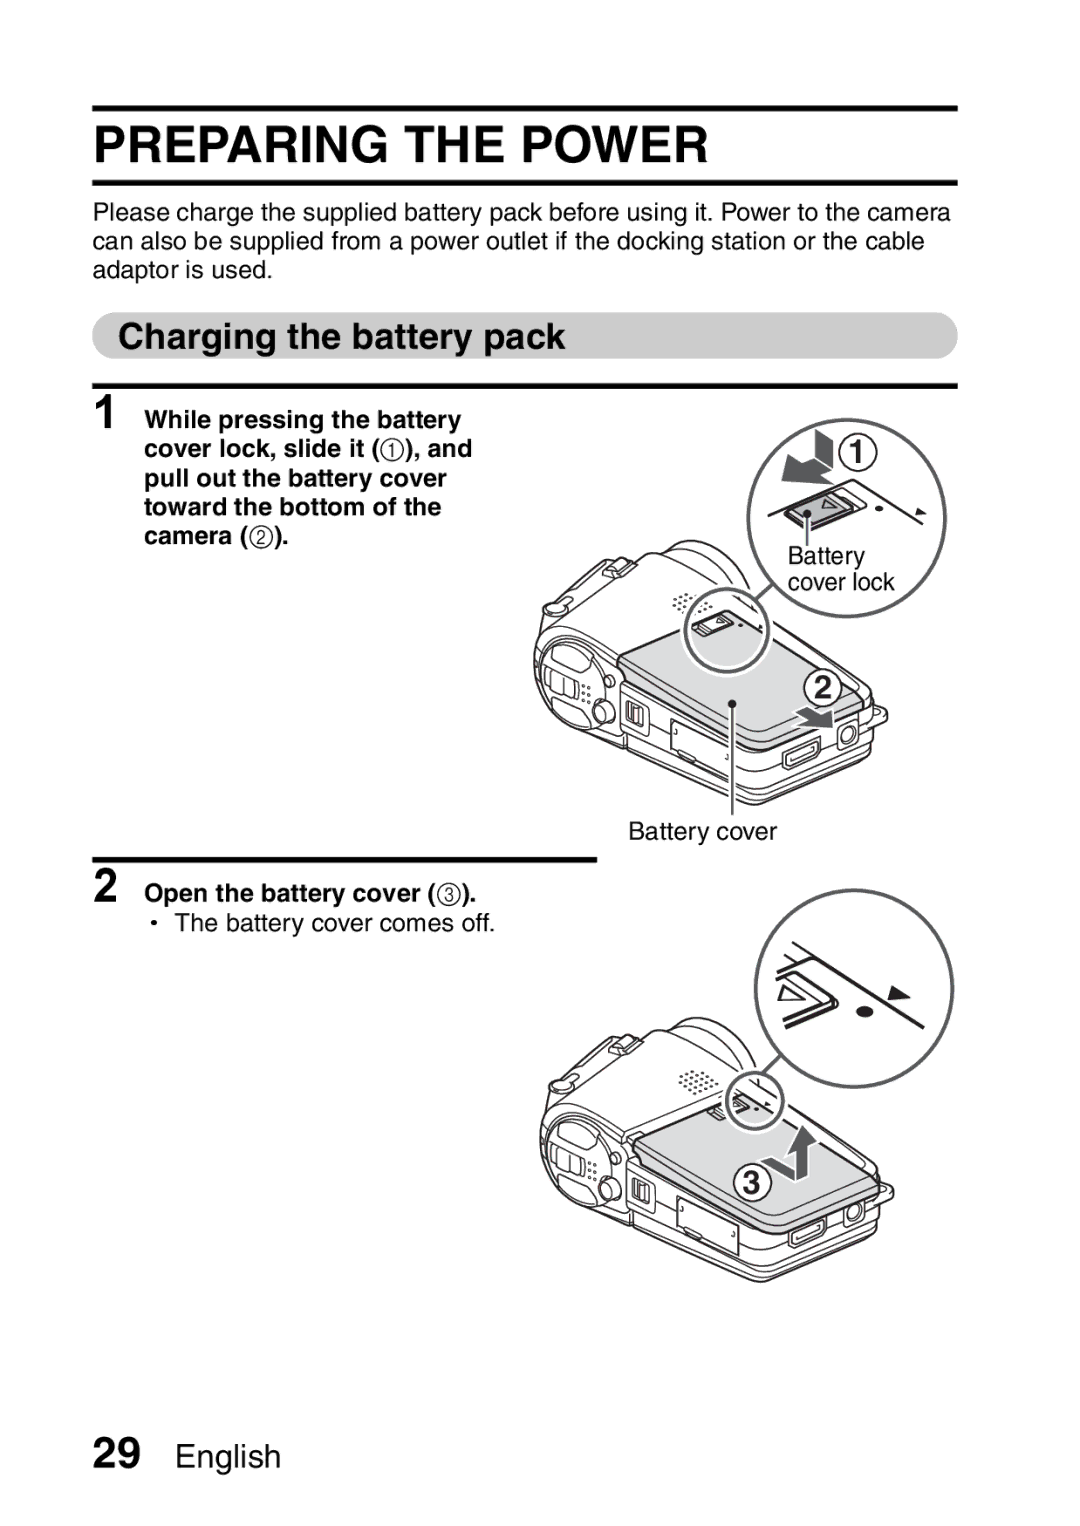 Sanyo VPC-HD2EX, VPC-H2GX instruction manual Preparing the Power, Charging the battery pack, Open the battery cover 